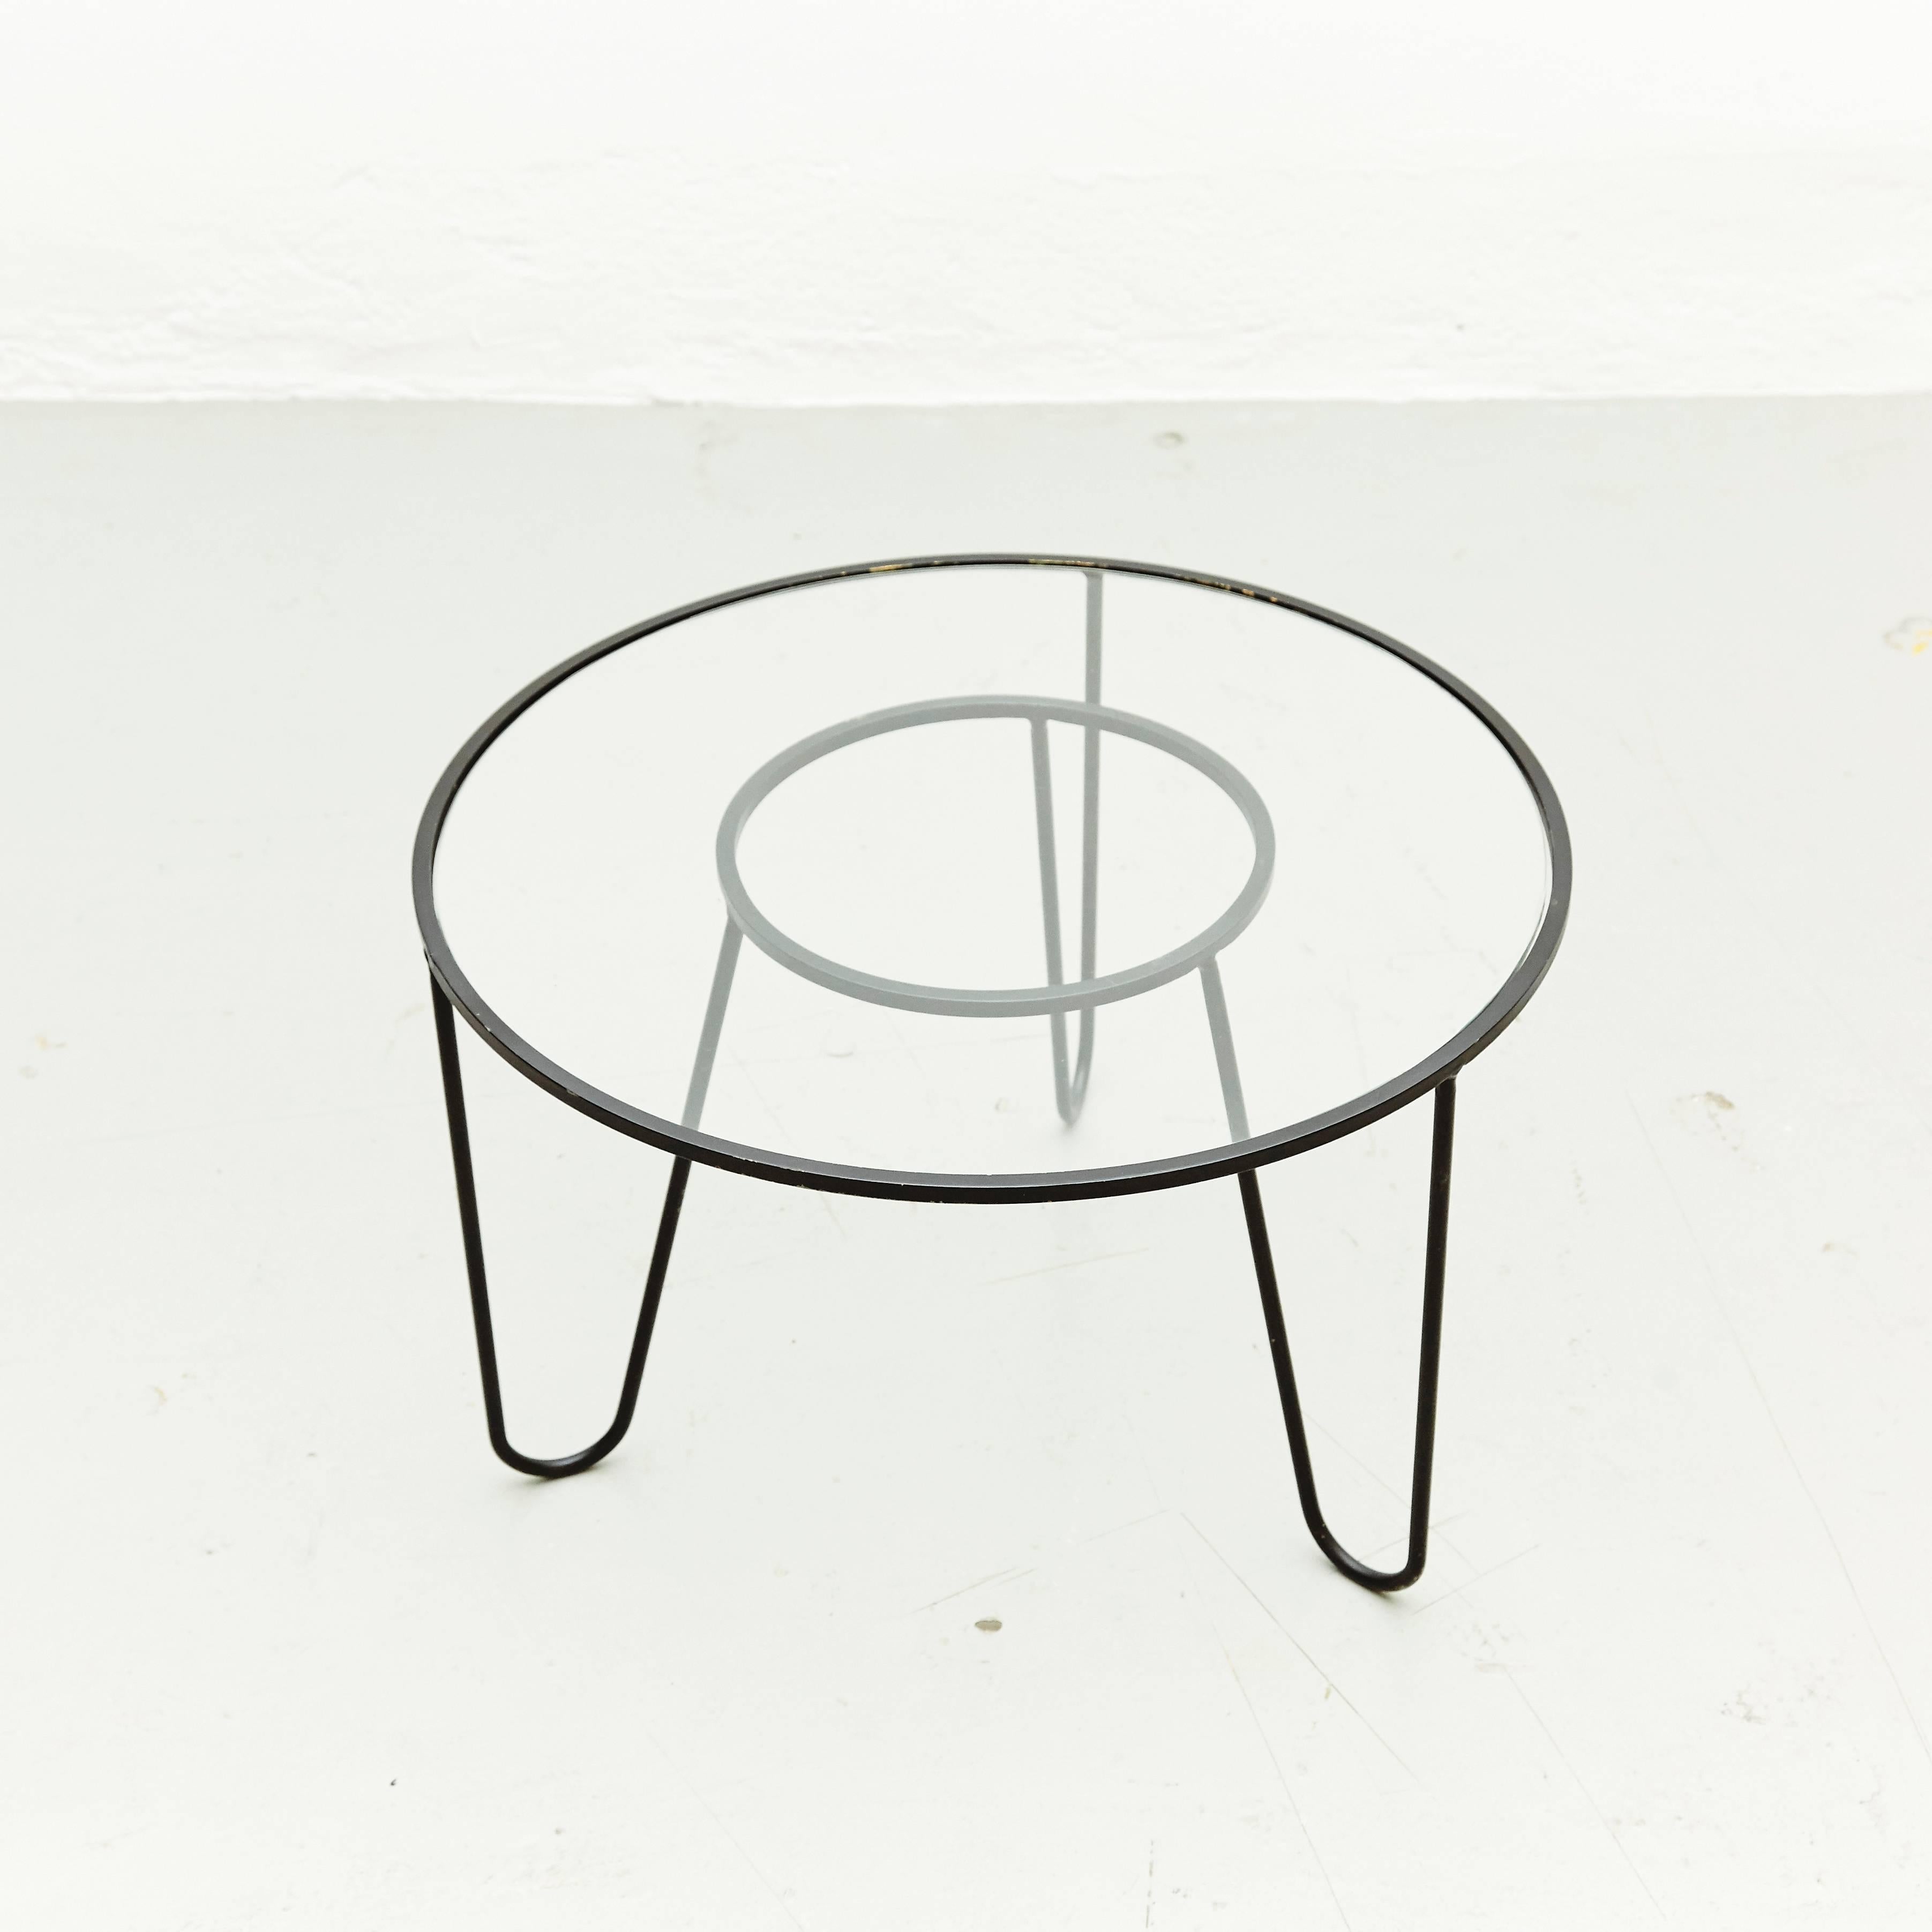 'Bellevue' coffee table designed by Mathieu Matégot.
Manufactured by Ateliers Matégot, France, circa 1950.

Lacquered metal with original paint.

In good original condition, with minor wear consistent with age and use, preserving a beautiful